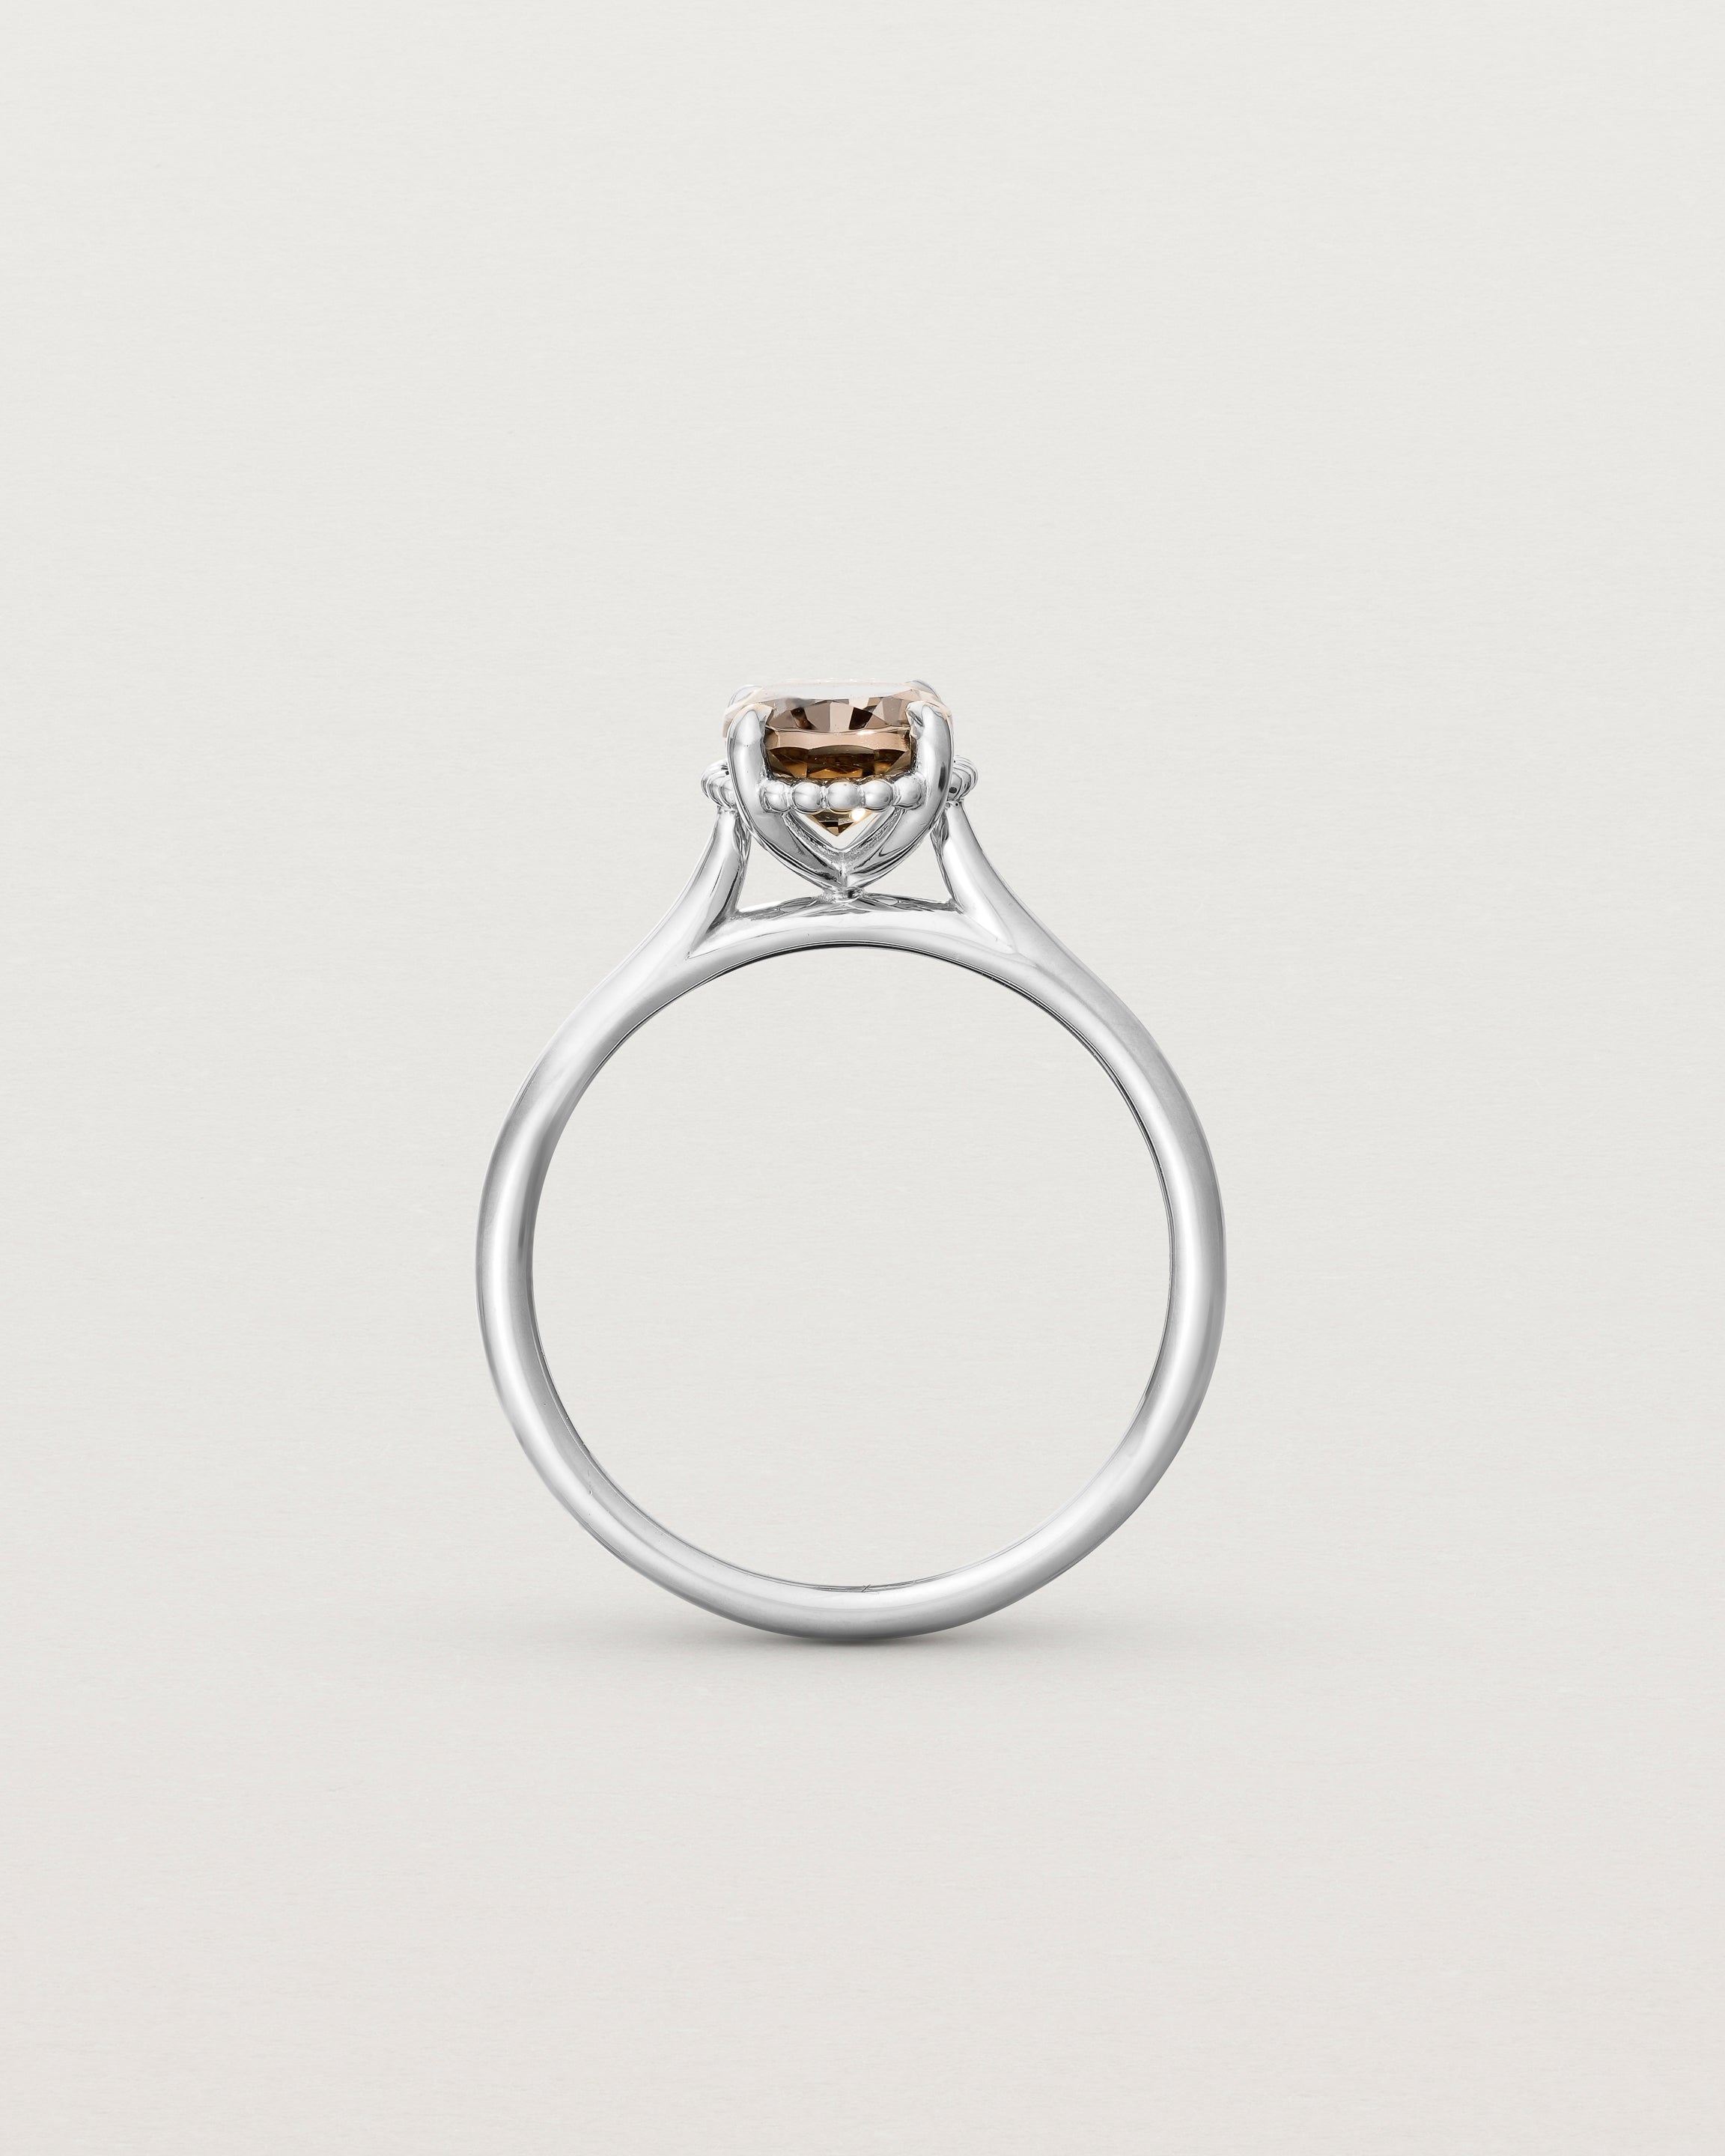 Standing view of the Thea Oval Solitaire | Smokey Quartz in white gold.